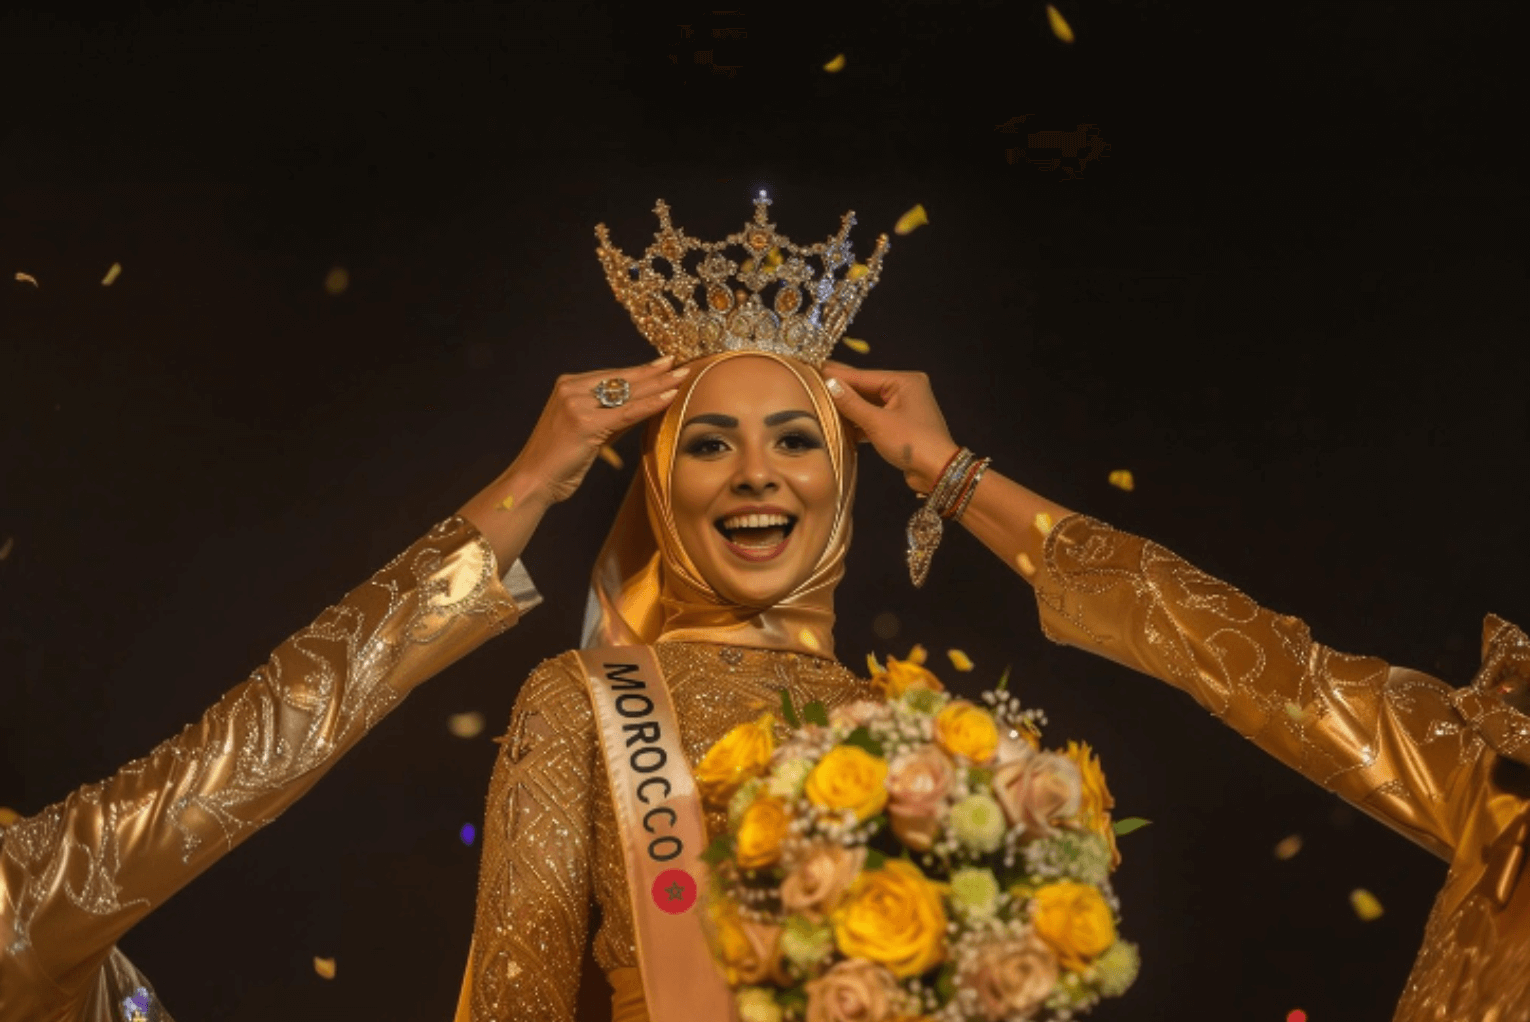 Pageant Crowns Robot as Beauty Queen